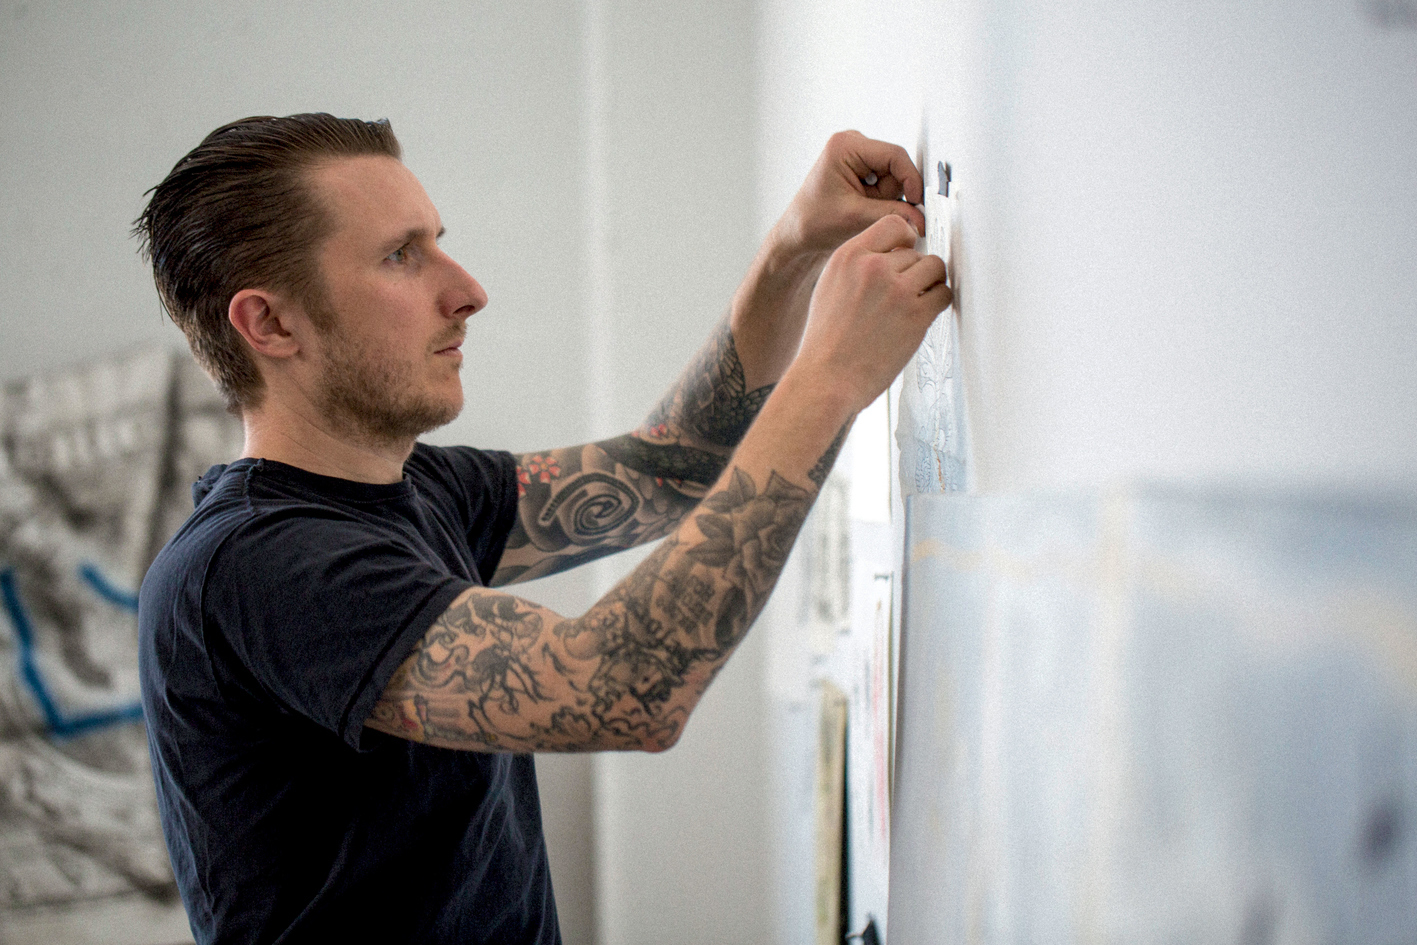 Scott Campbell is best-known for tattooing stars and icons from the worlds of cinema, fashion, art and design including Marc Jacobs, Heath Ledger and Penelope Cruz at his Brooklyn studio.